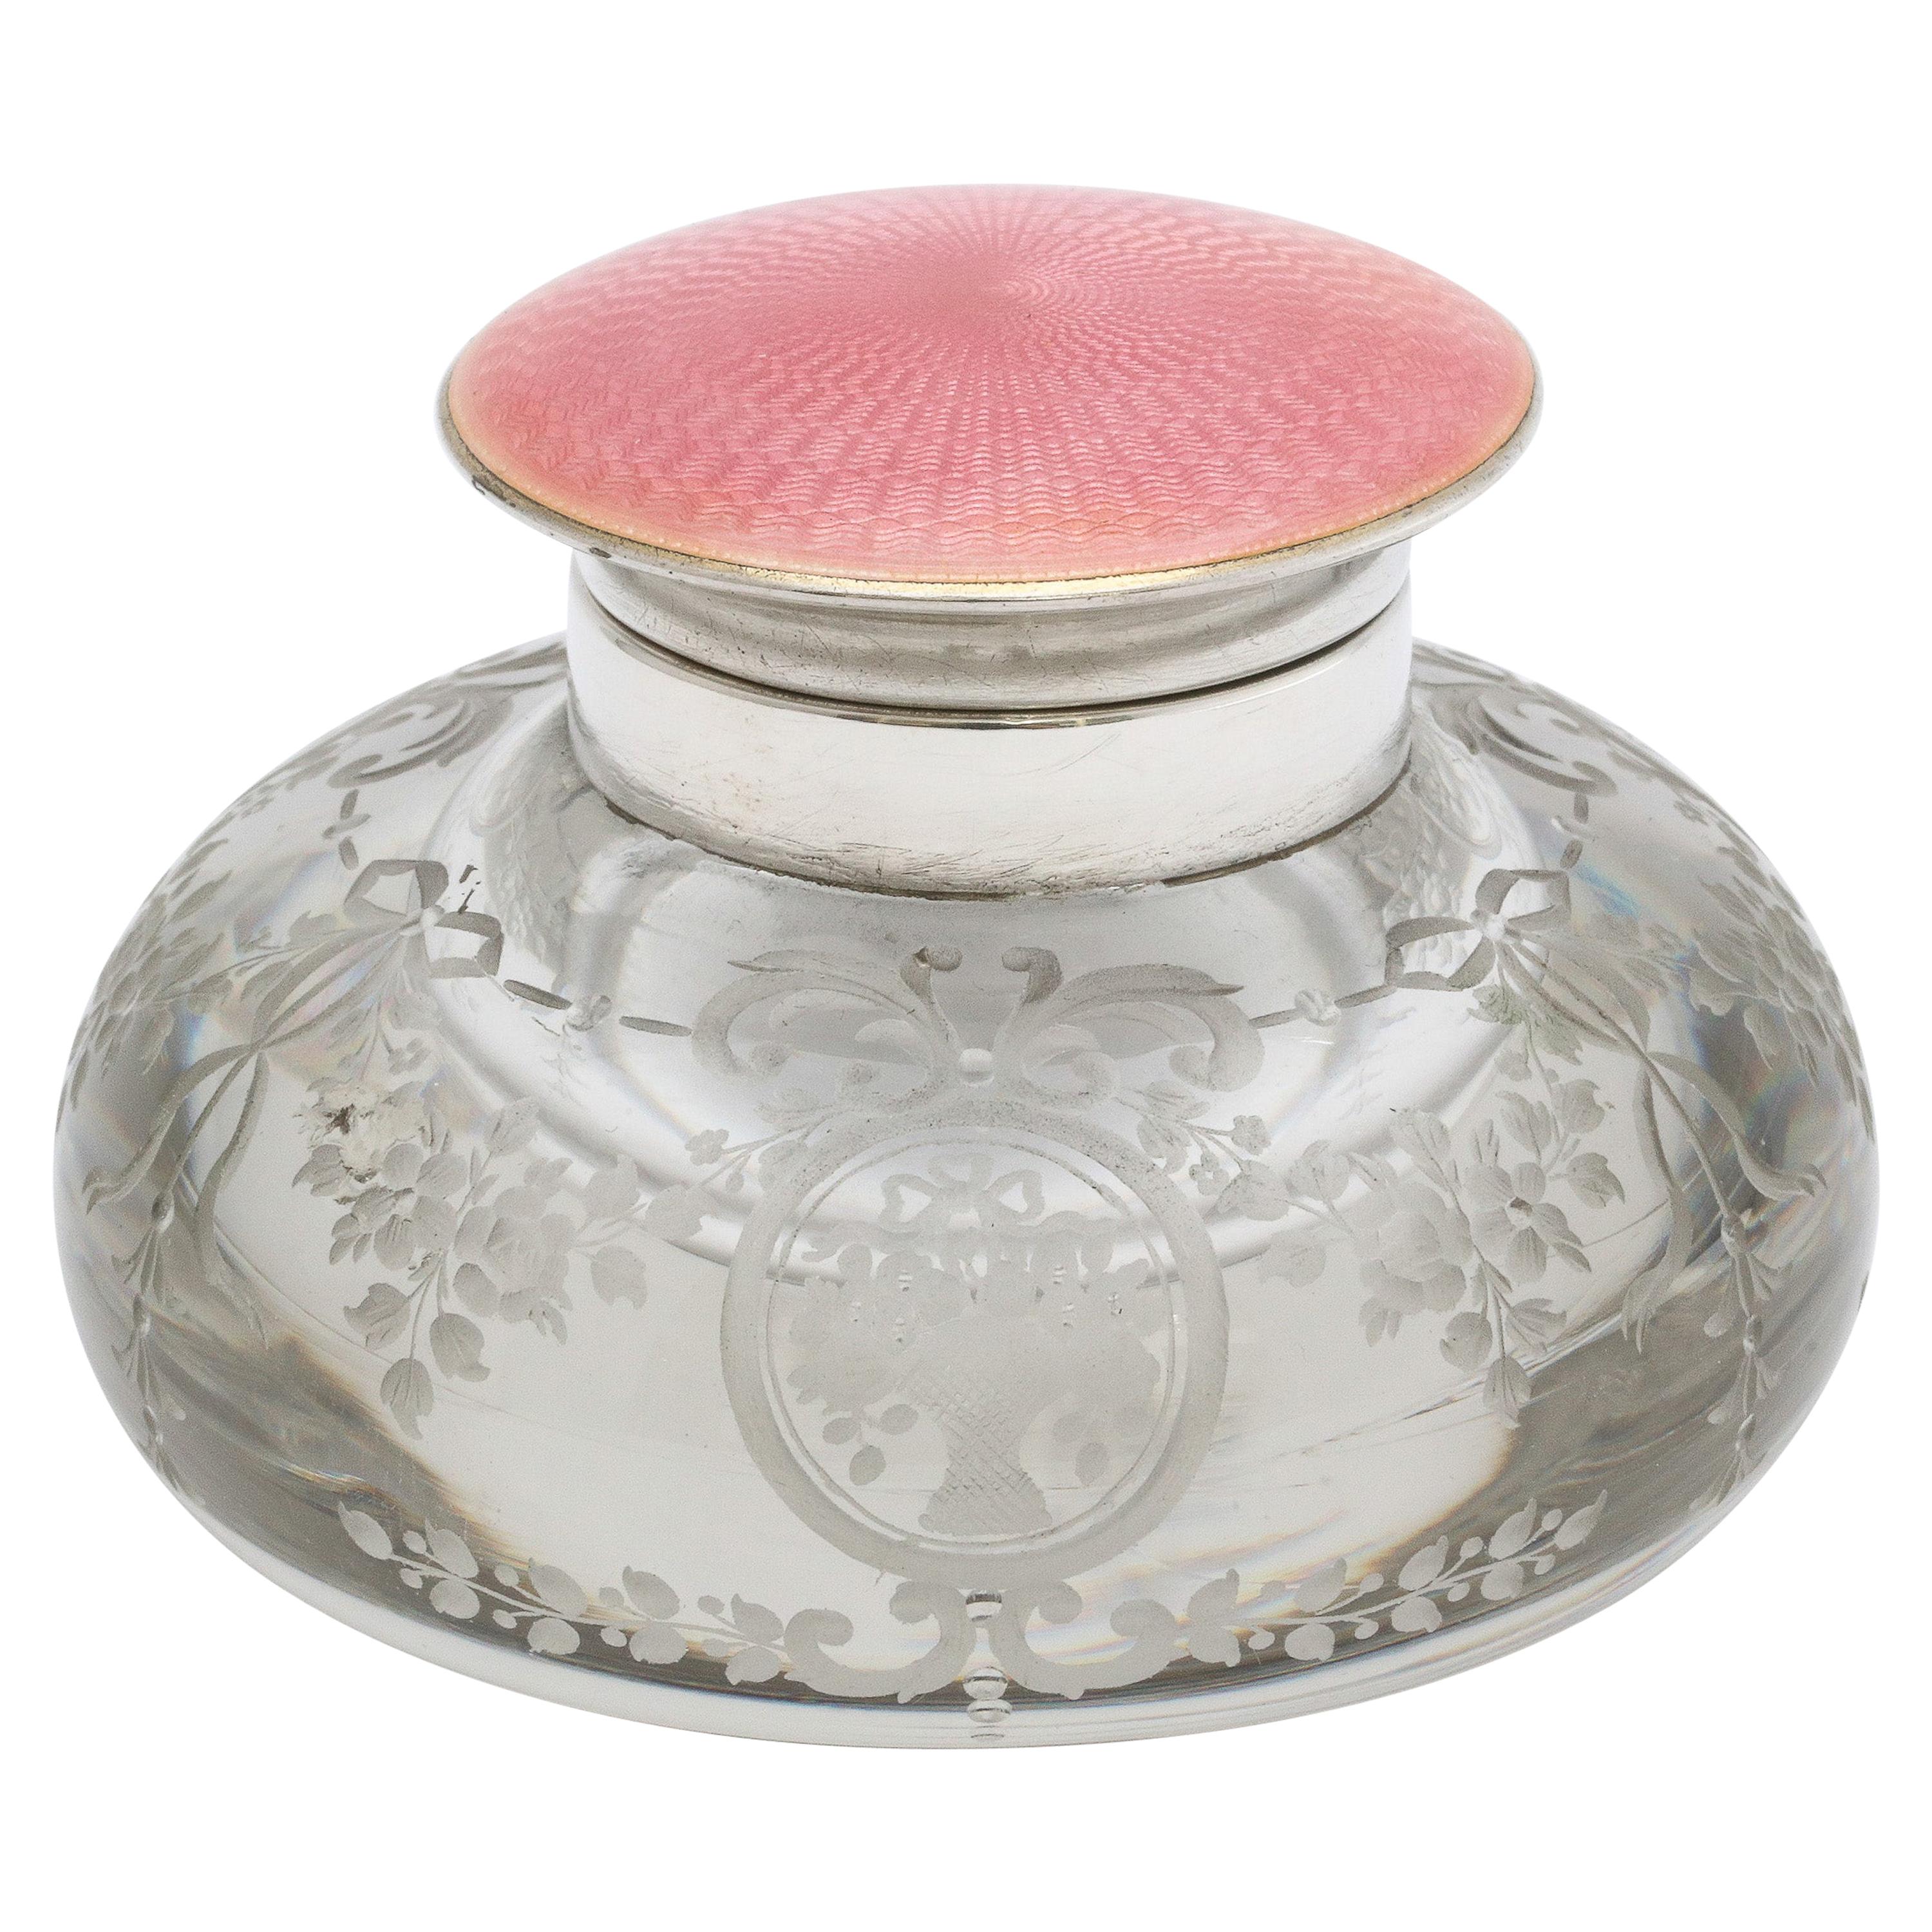 Edwardian Period Sterling Silver and Pink Enamel-Mounted Crystal Inkwell